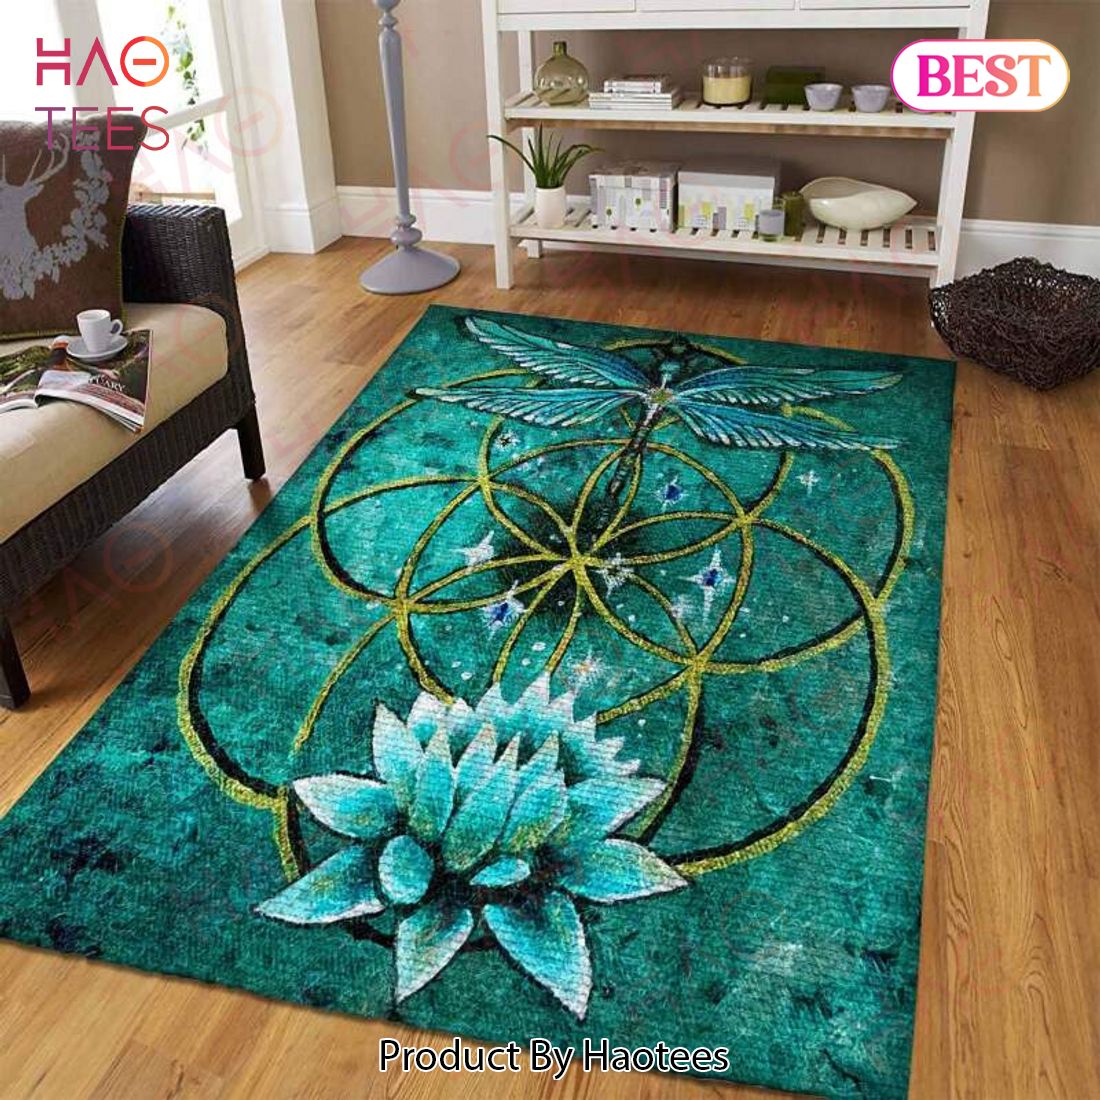 Dragonfly Limited Edition Area Rugs Carpet Mat Kitchen Rugs Floor Decor – FY11